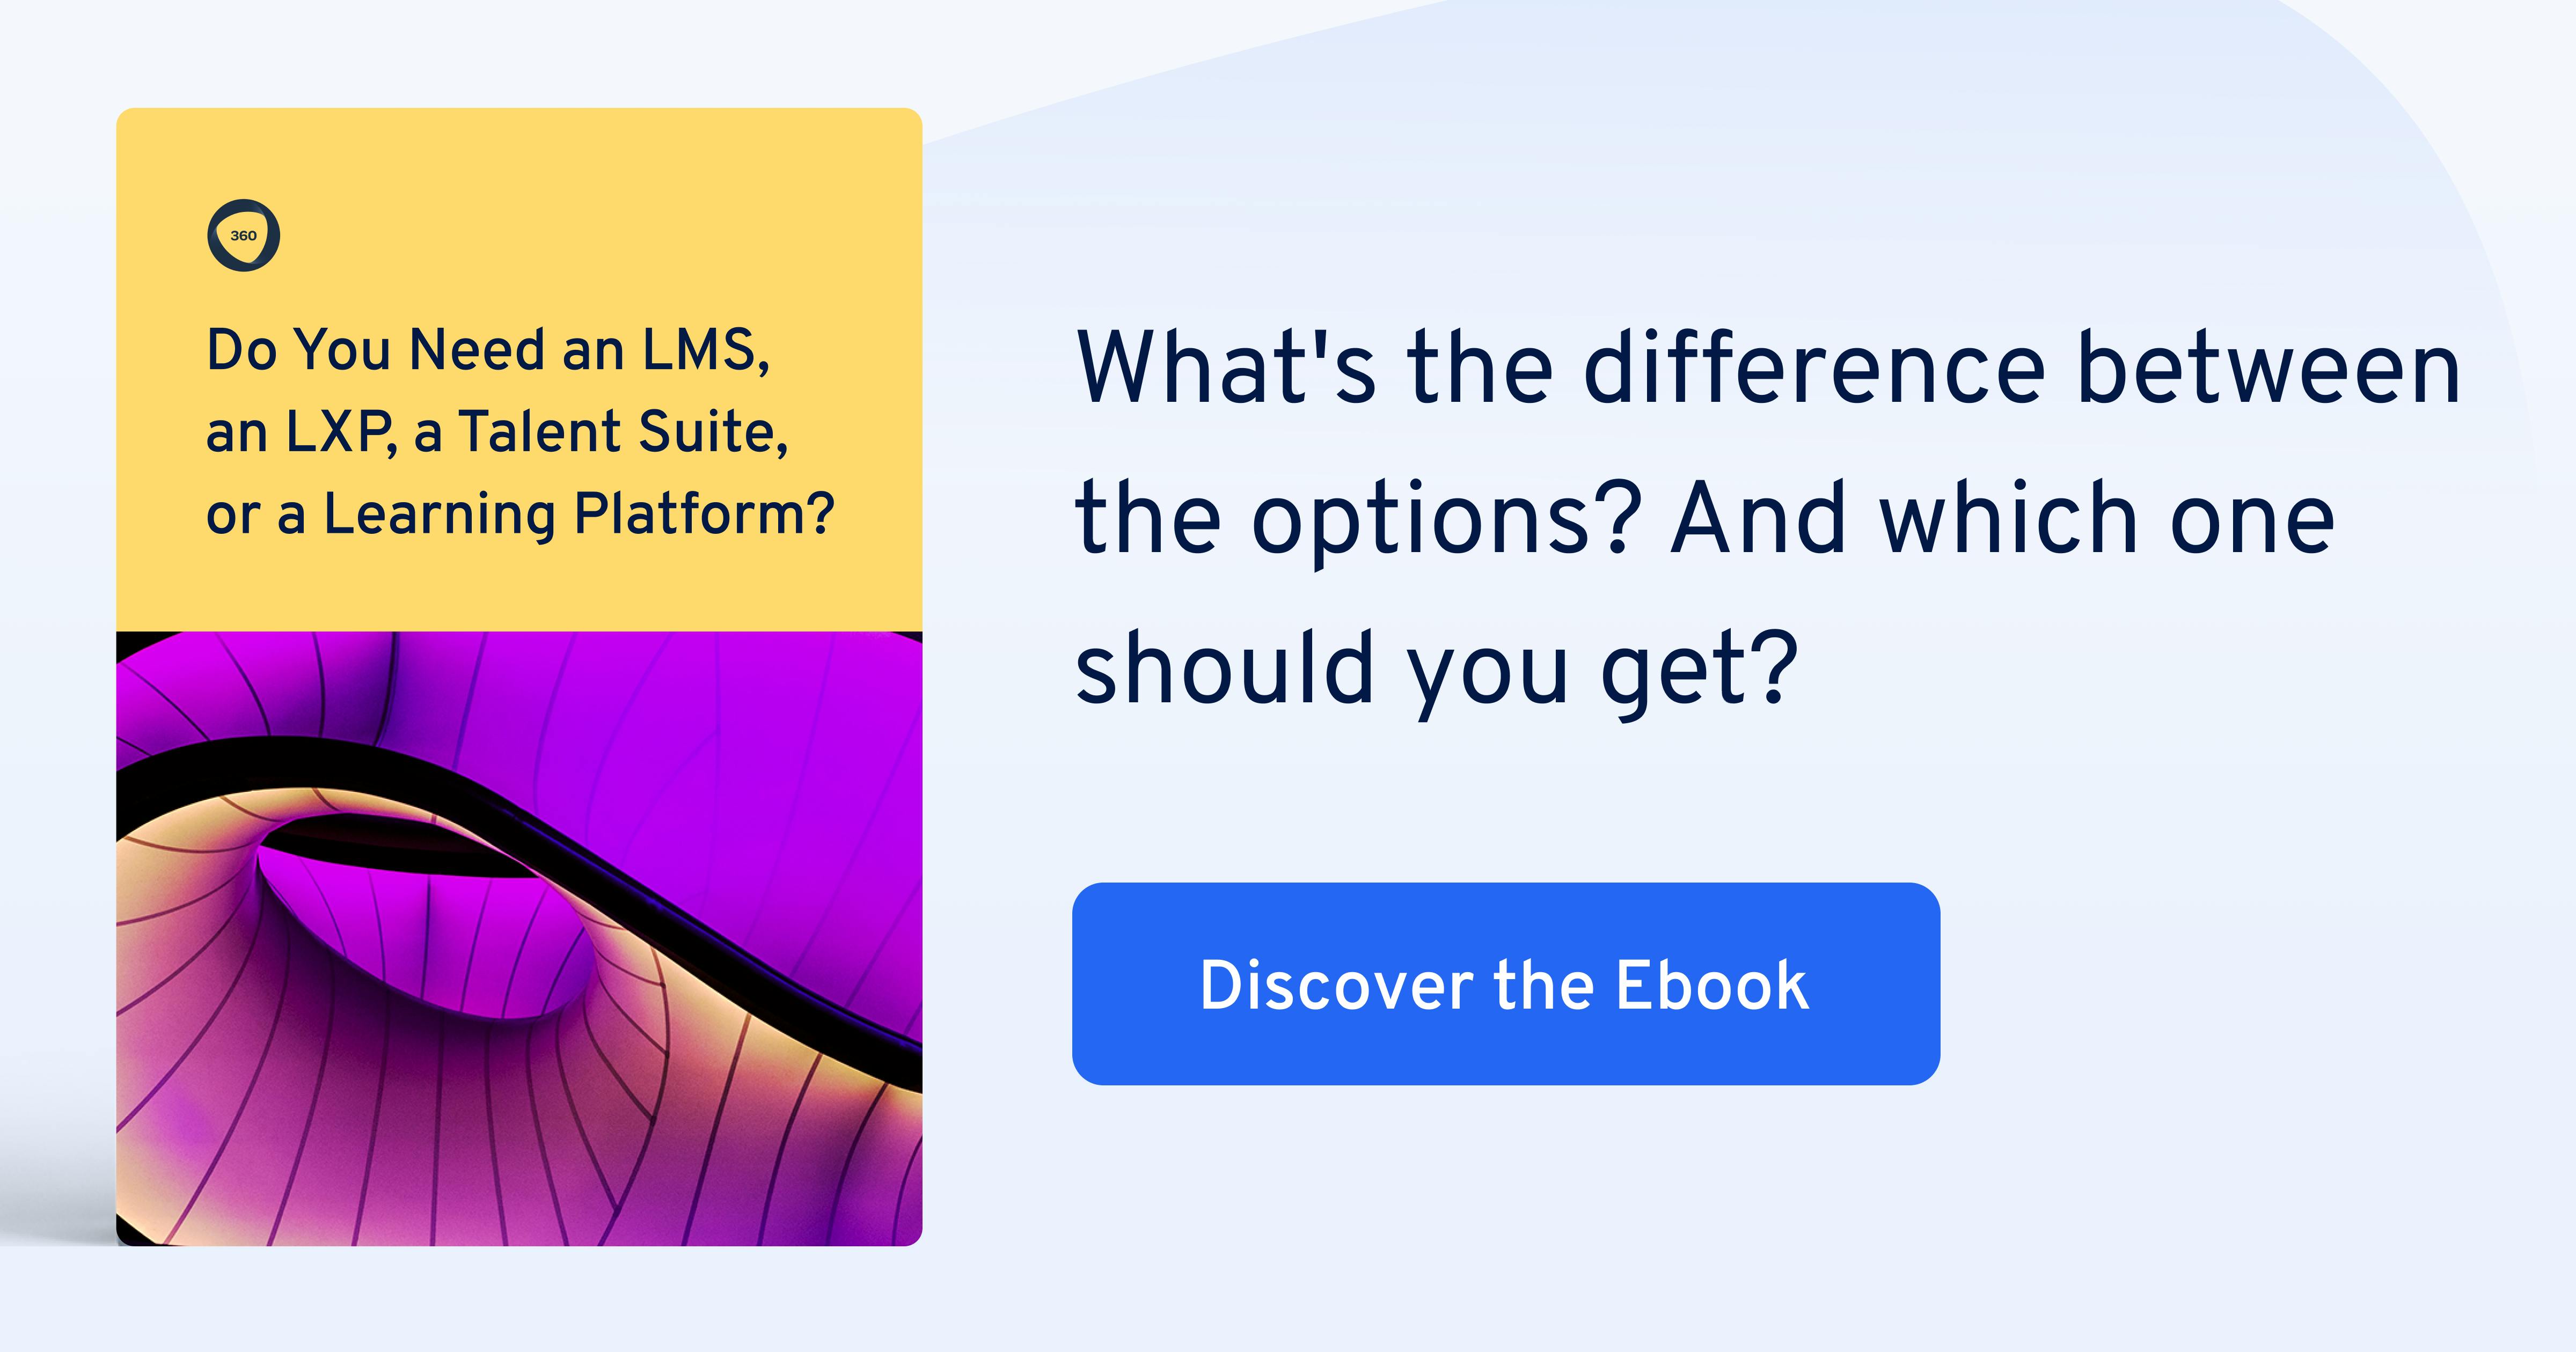 Do You Need an LMS, LXP, Talent Suite, or Learning Platform?